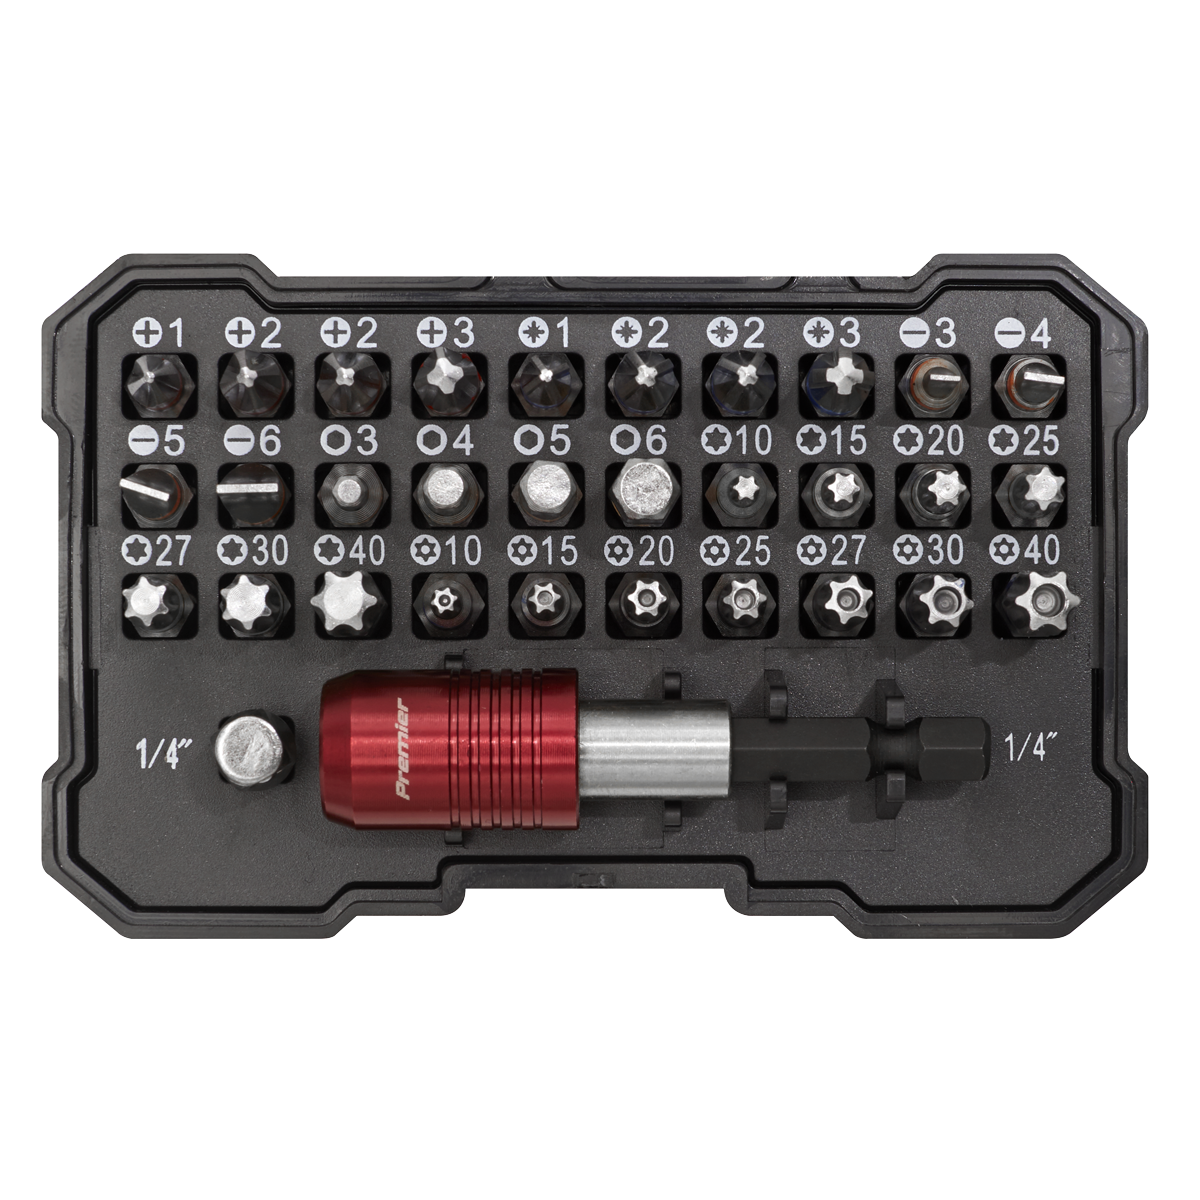 Sealey magnetic screwdriver with driver bits